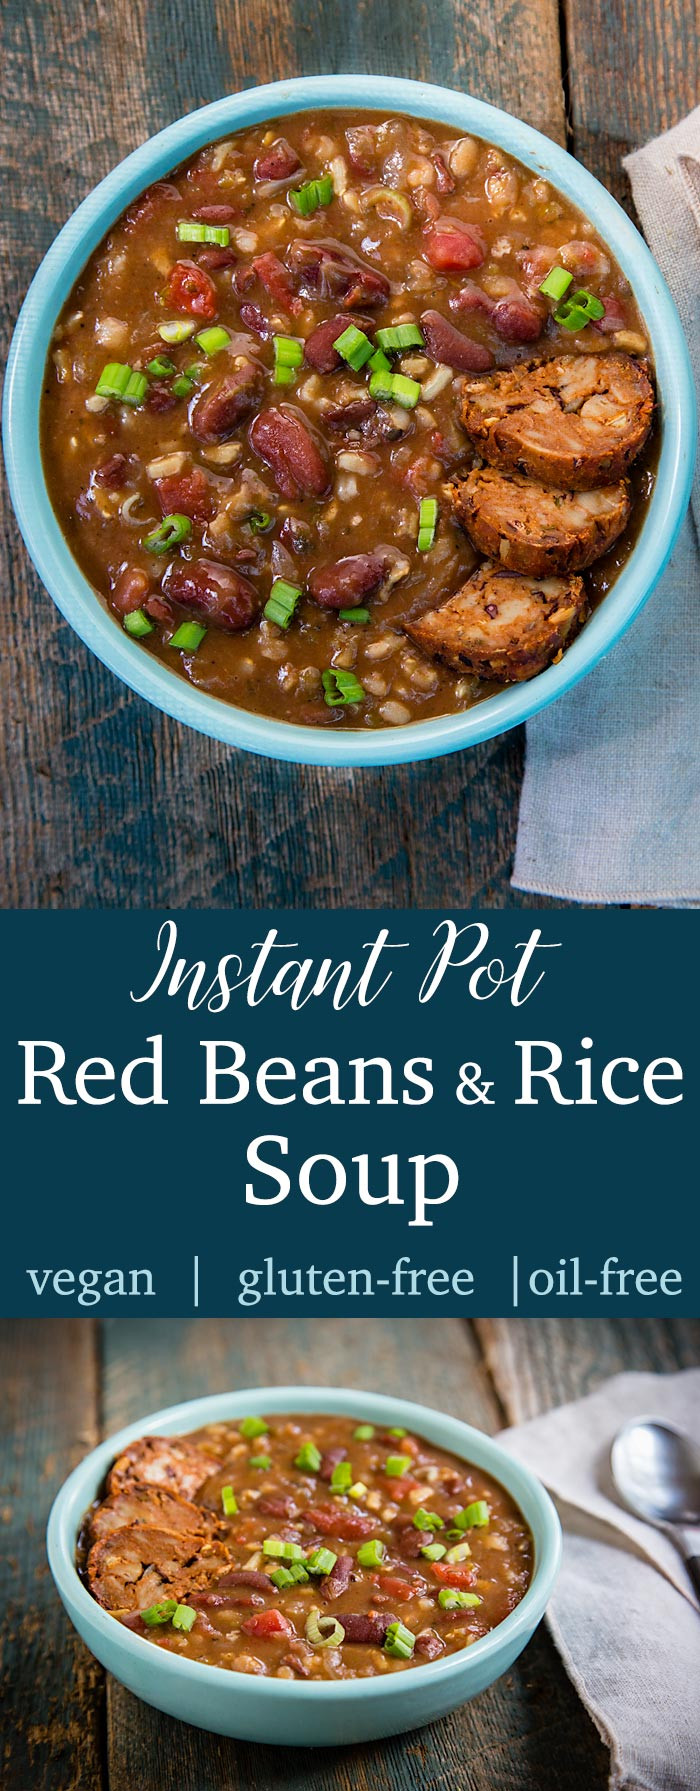 Red Beans And Rice Recipe Instant Pot
 Instant Pot Red Beans and Rice Soup